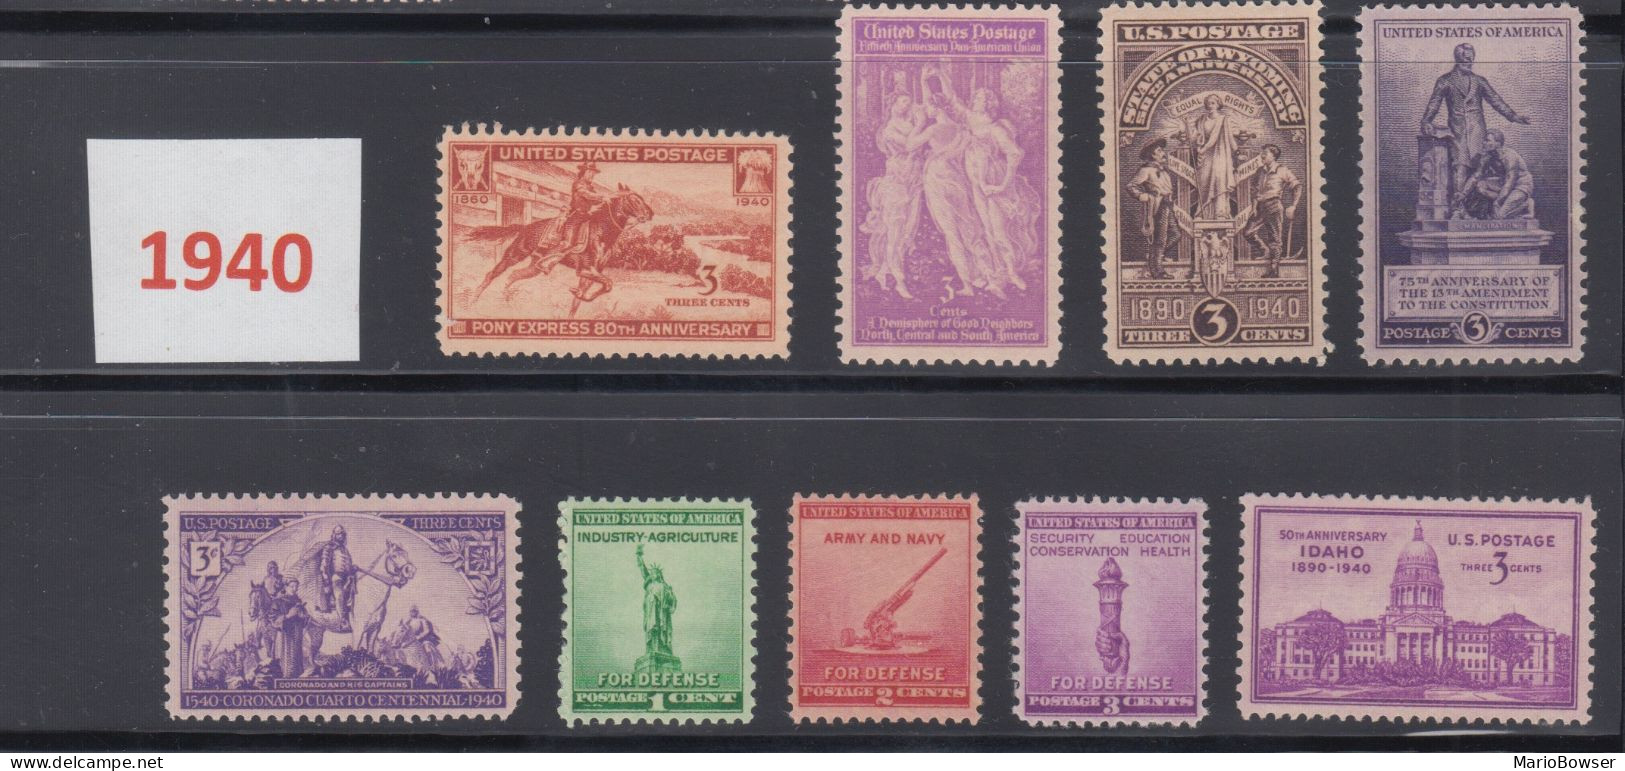 USA 1940 Full Year Commemorative MNH Stamps Set SC# 894-902 With 9 Stamps - Annate Complete